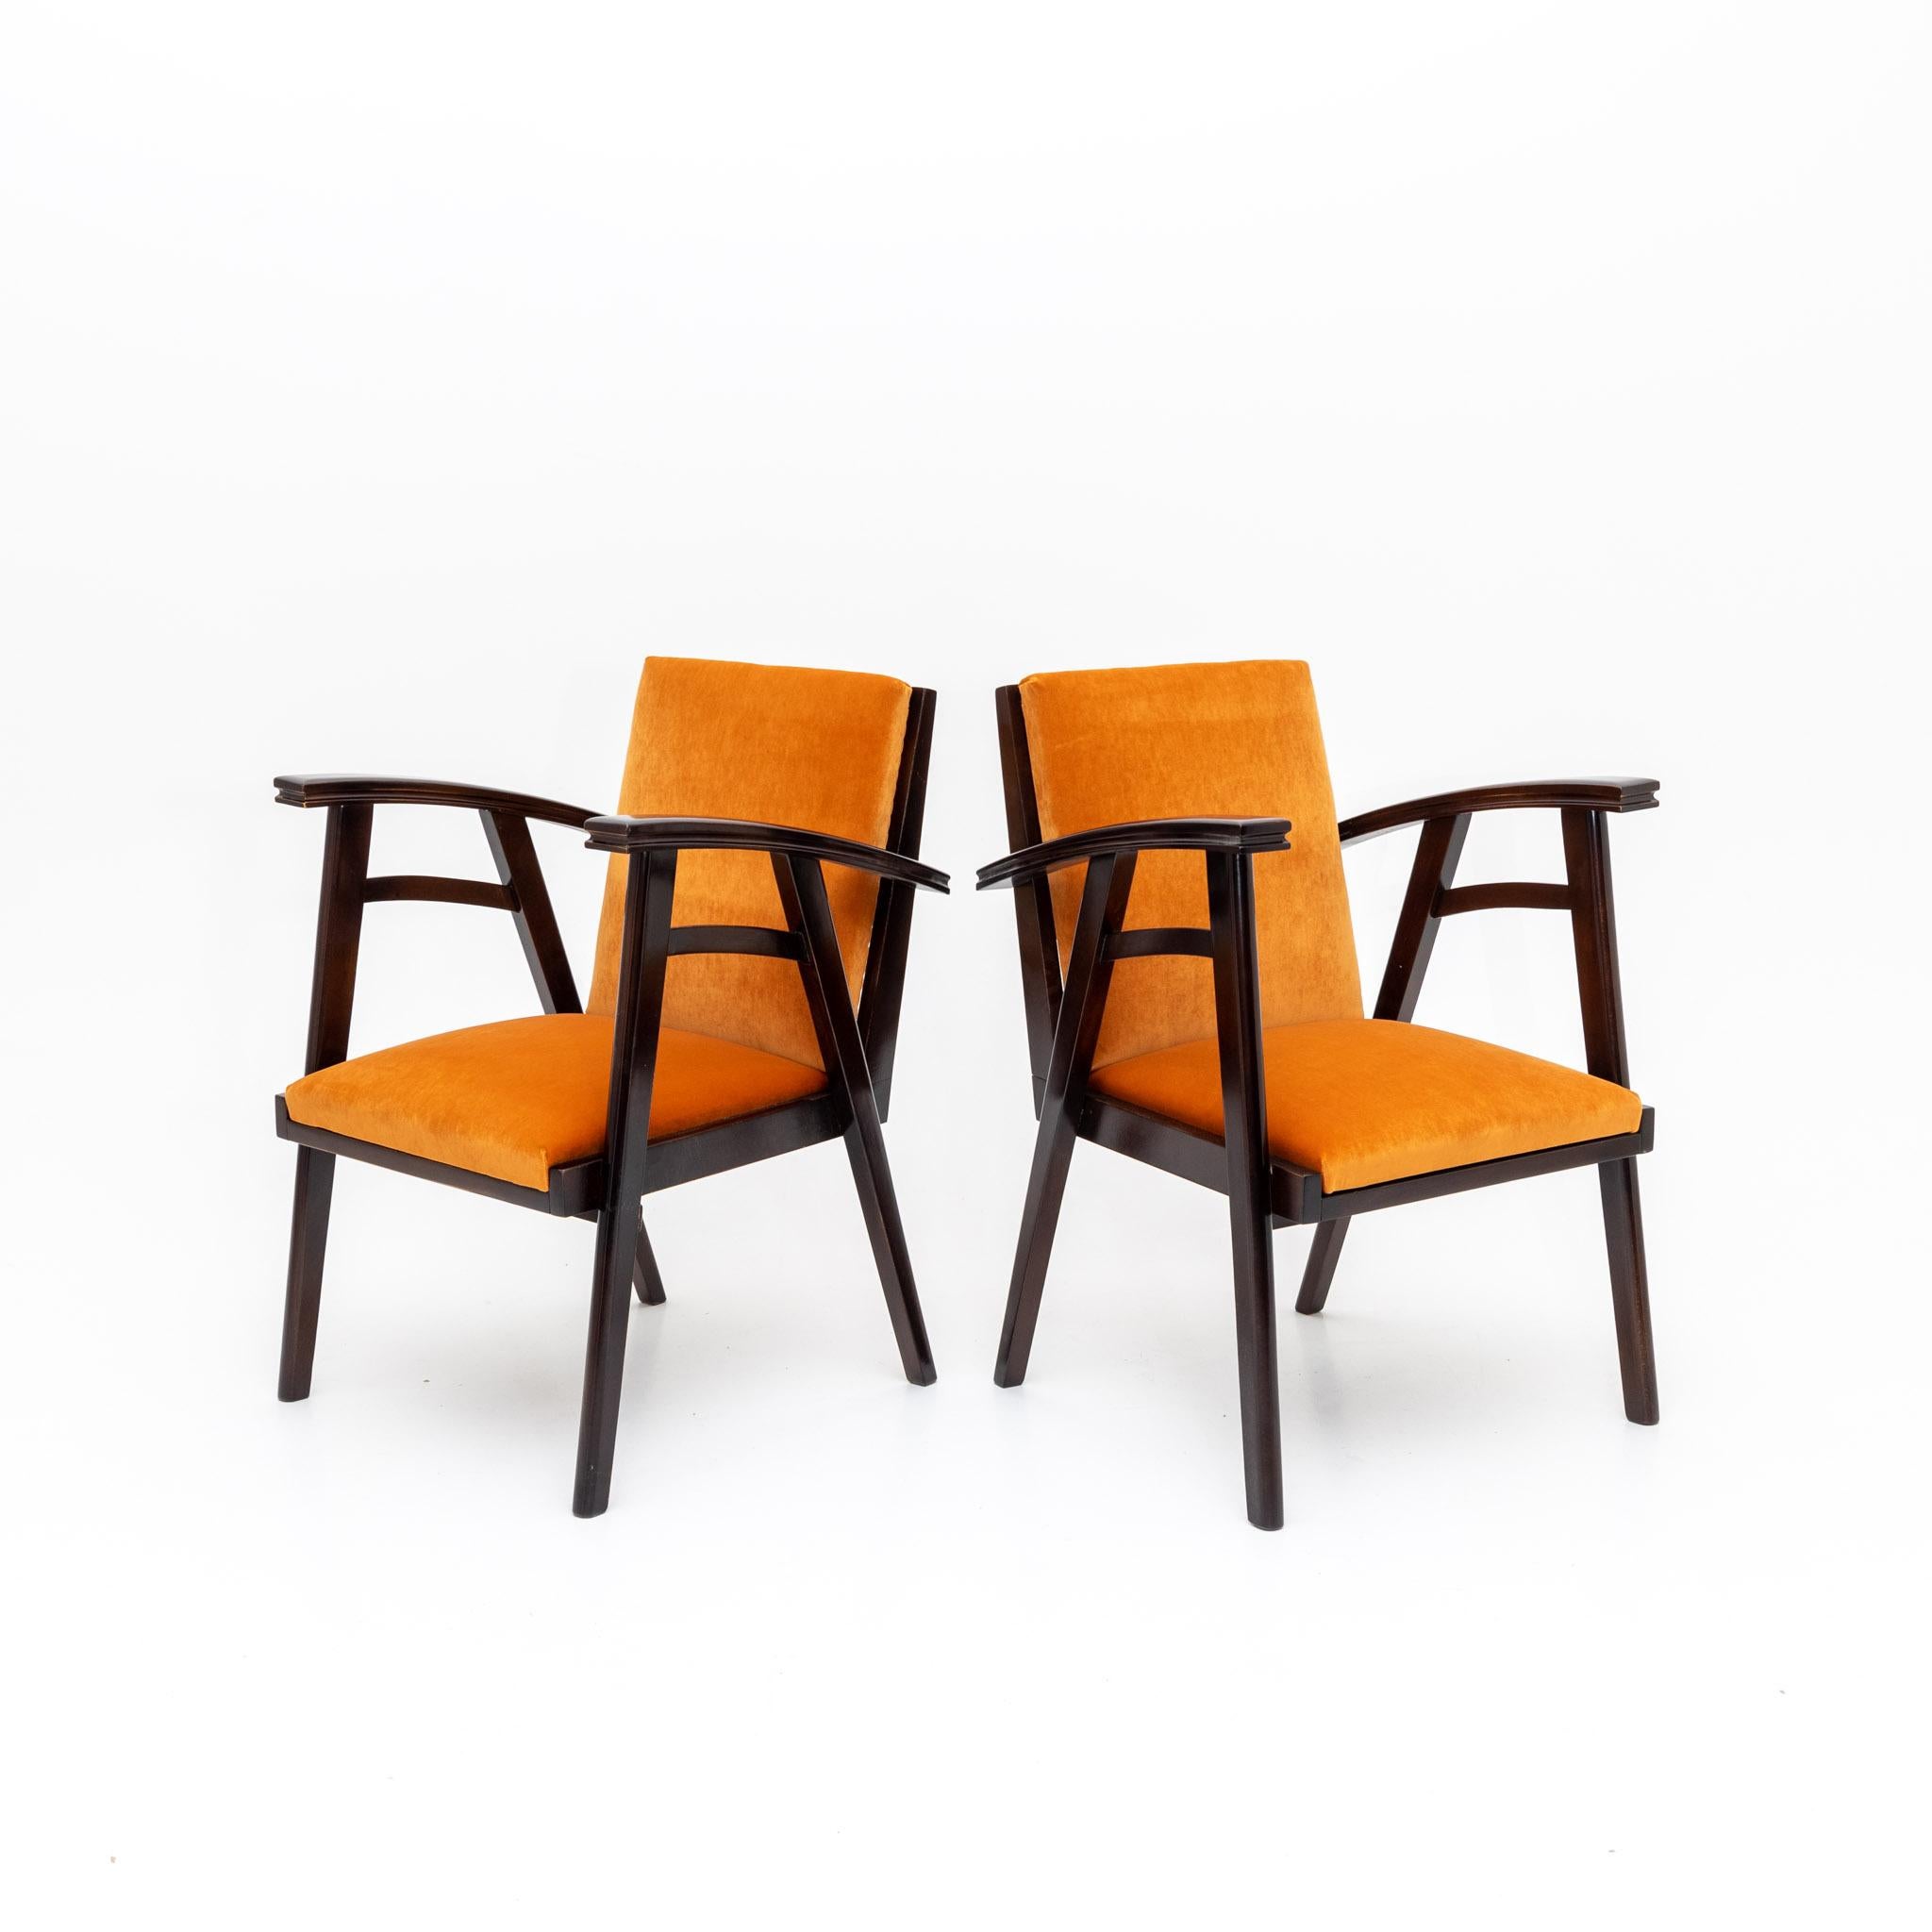 Pair of armchairs with dark stained wooden frames and upholstered seats. The arm chairs have been reupholstered in an orange velvet fabric.